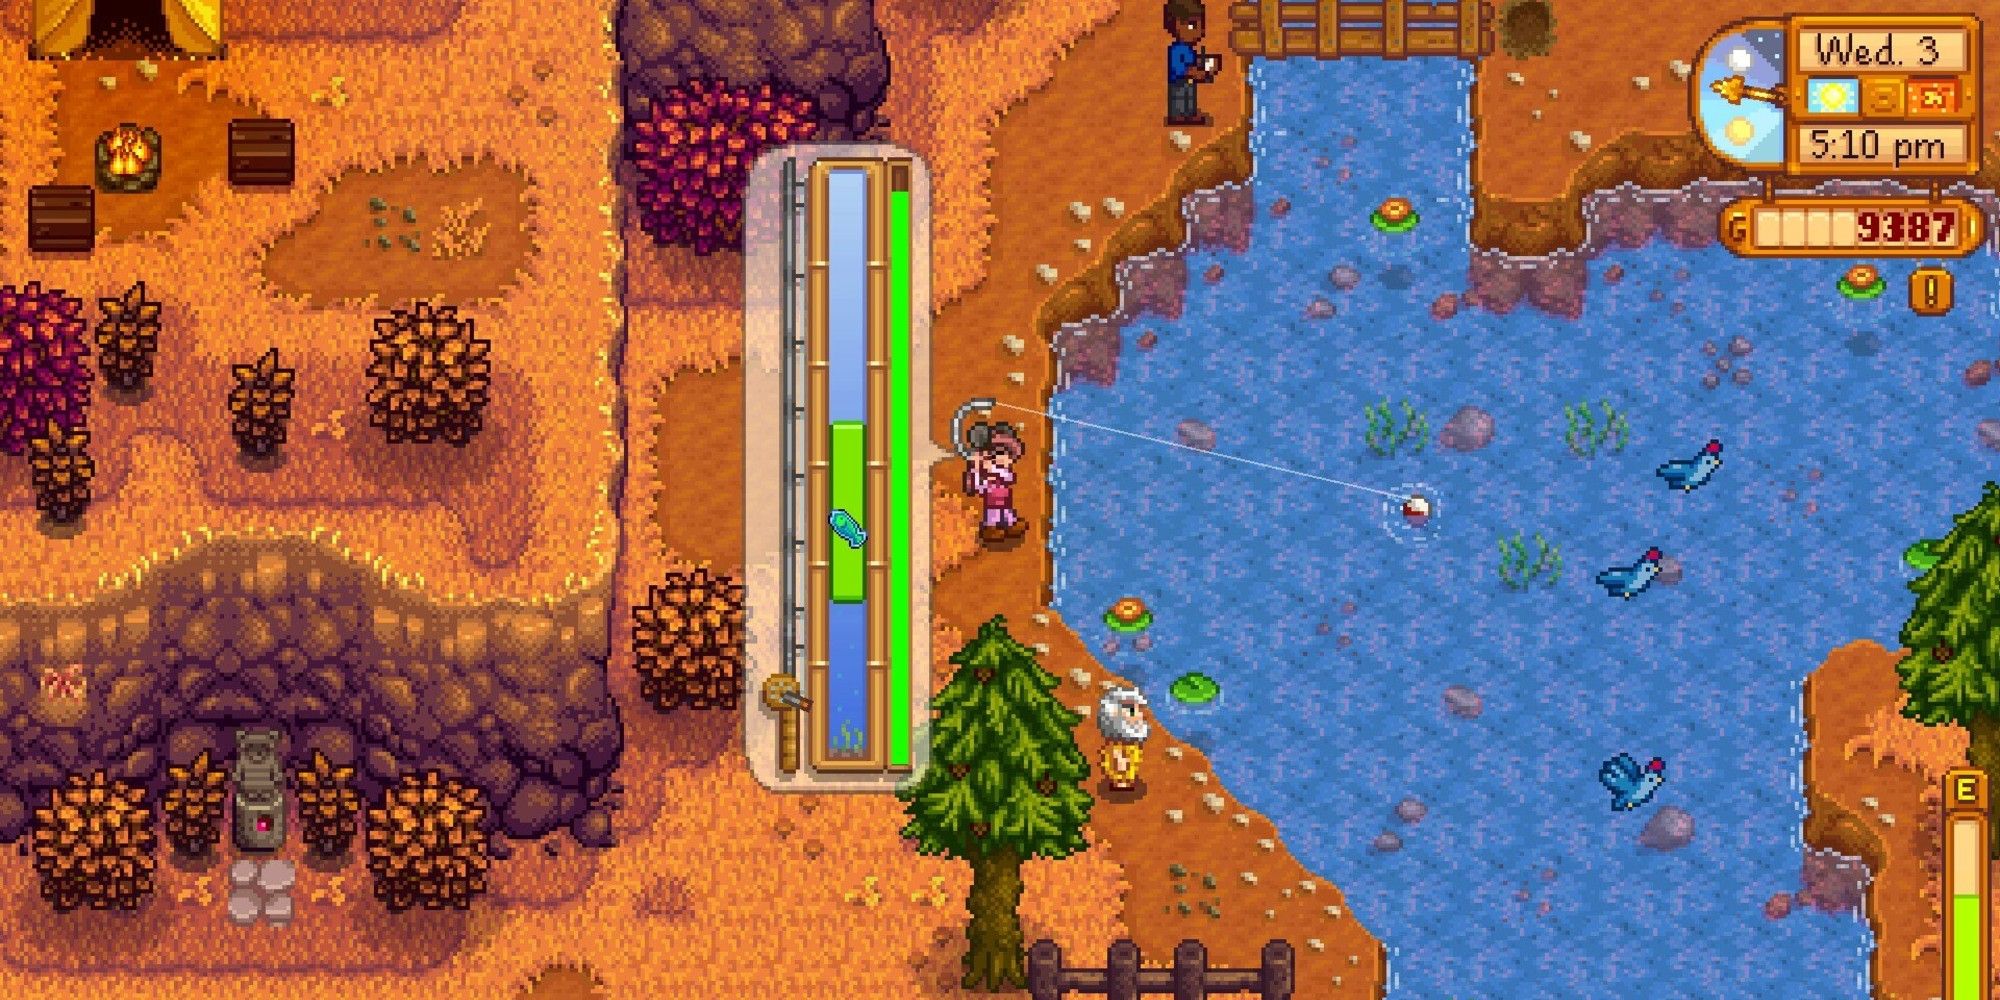 stardew valley player fishing with cork bobber, widening the fishing bar